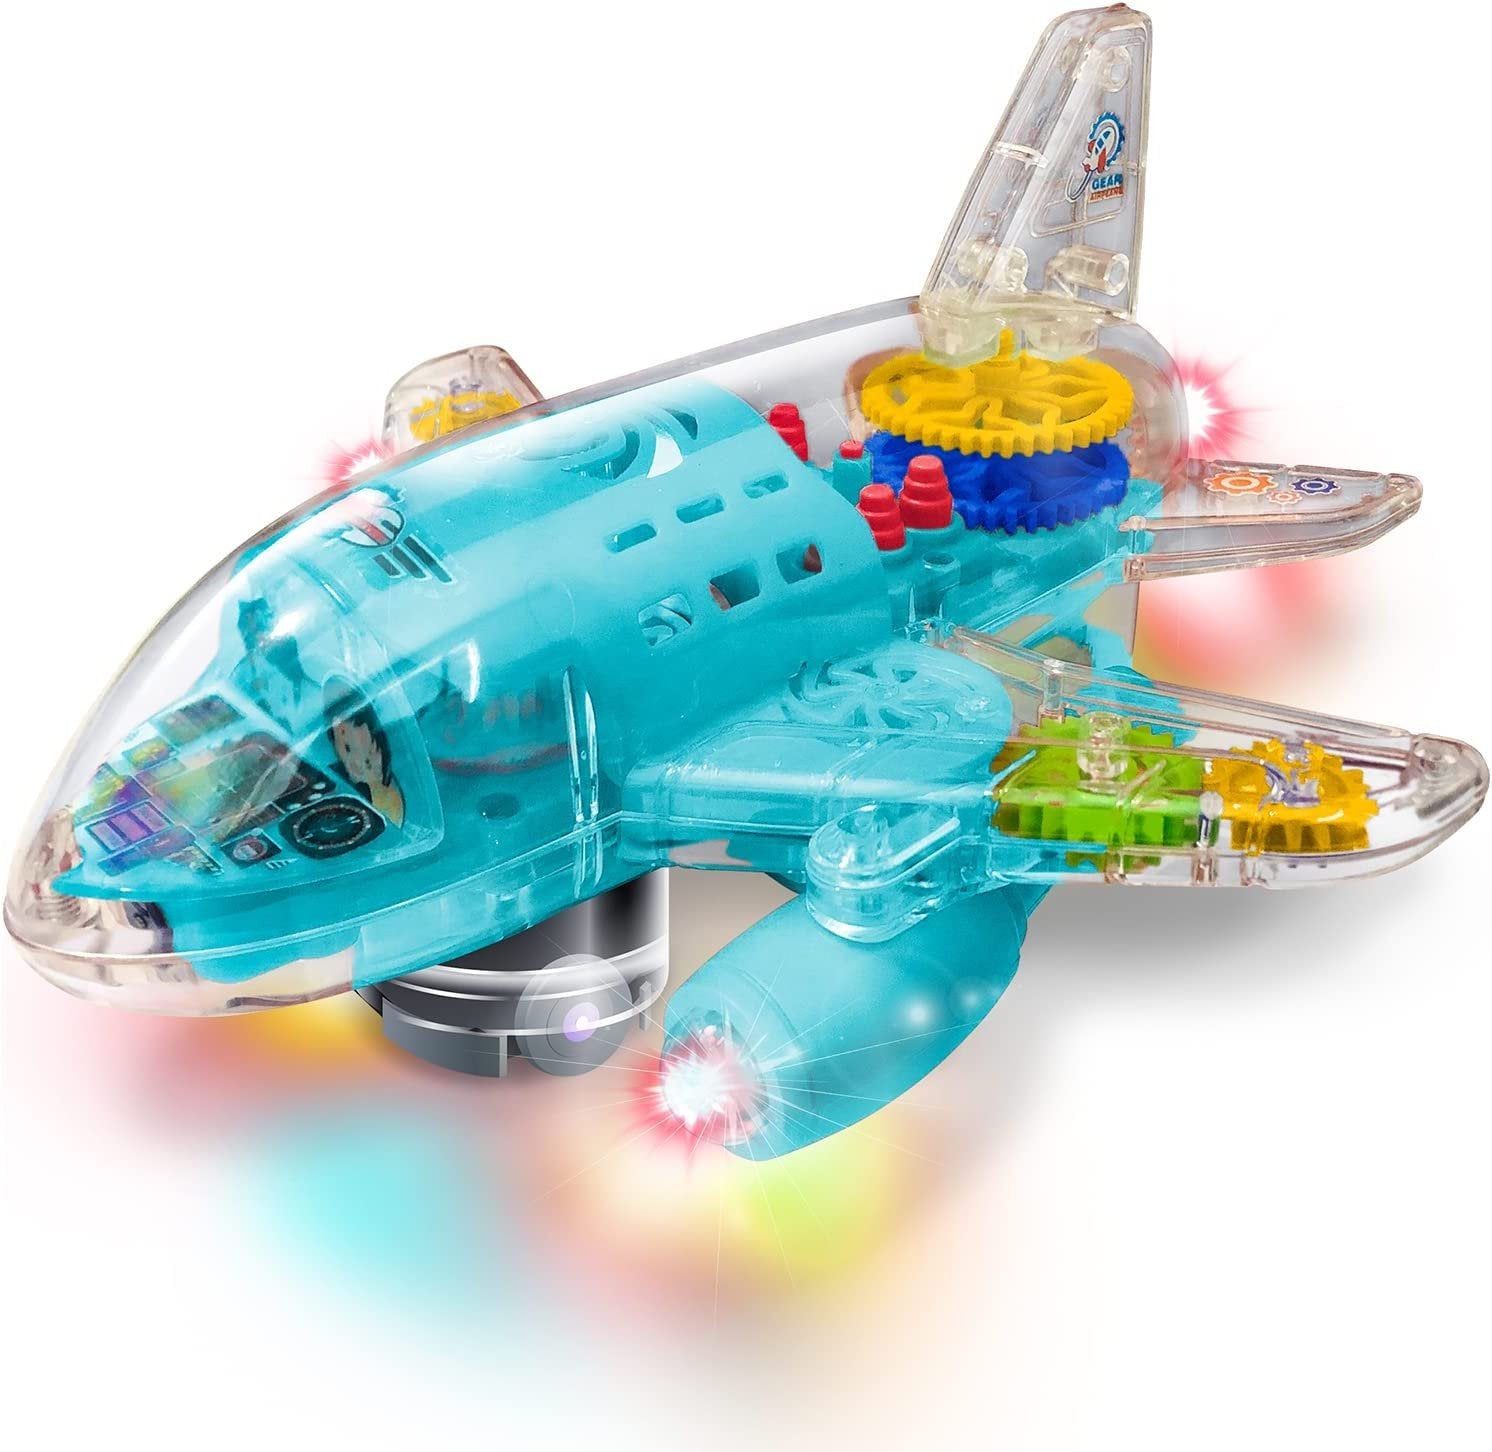 ArtCreativity Chunky Friction Airplane Toys for Kids, Set of 6, Push n Go  Plane Toys with Moving Propellers and Wings, Aviation Party Favors for Boys